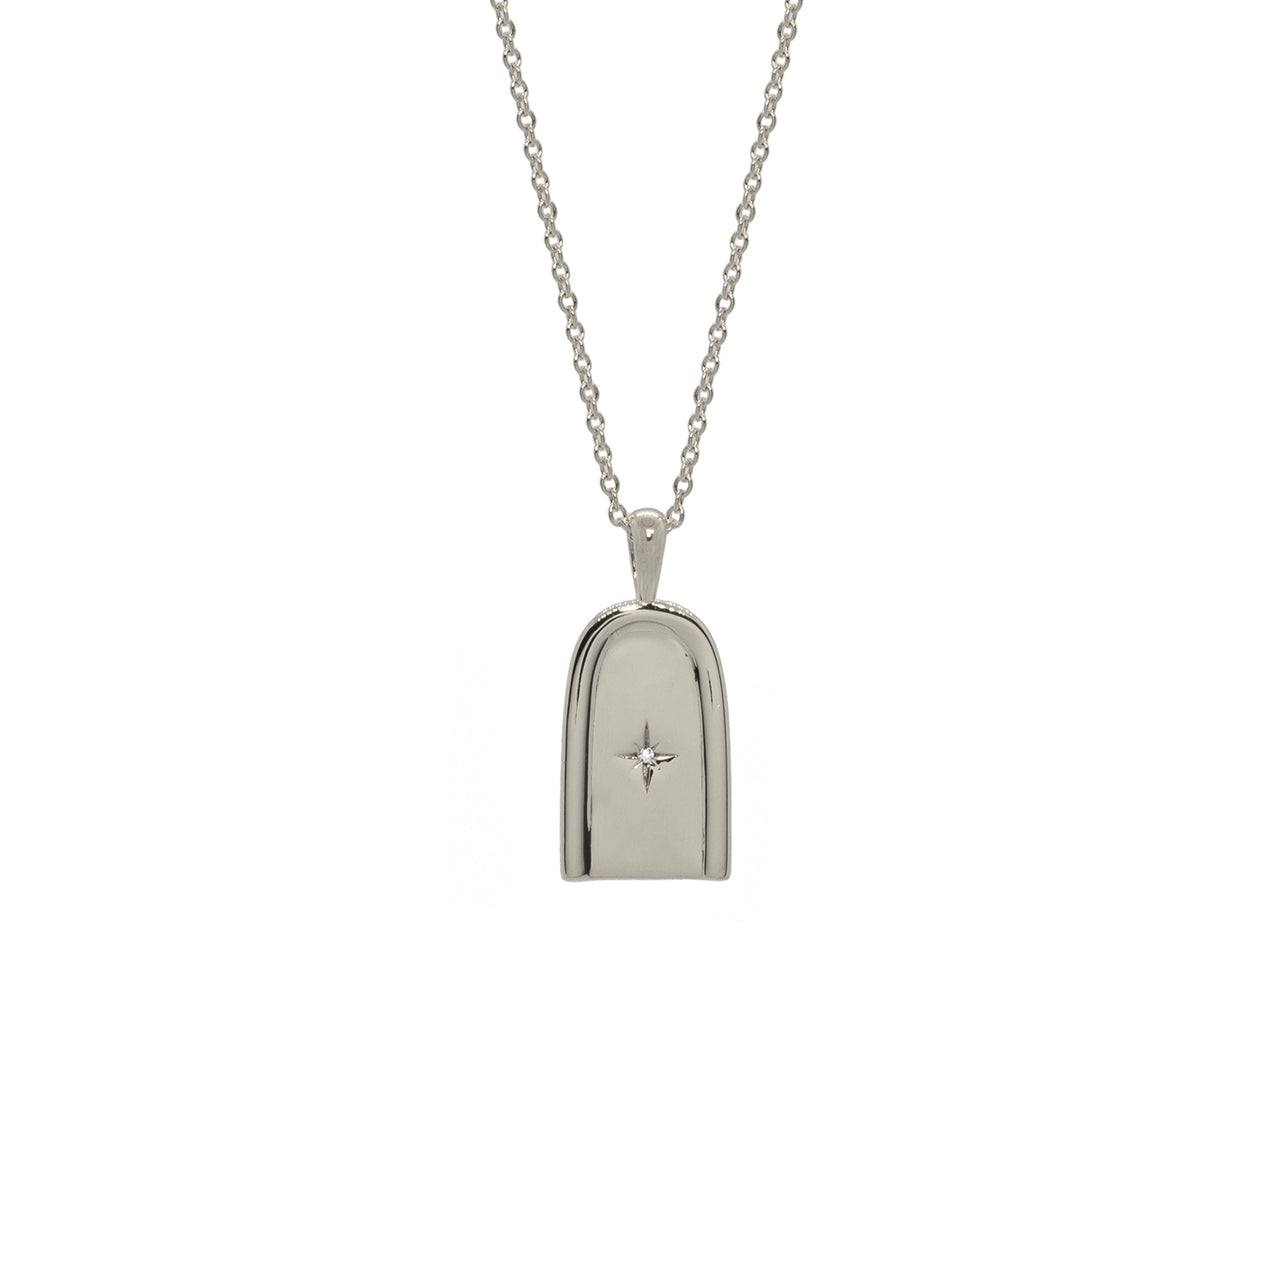 A sterling silver necklace. The necklace has a dainty chain featuring an arch pendant.